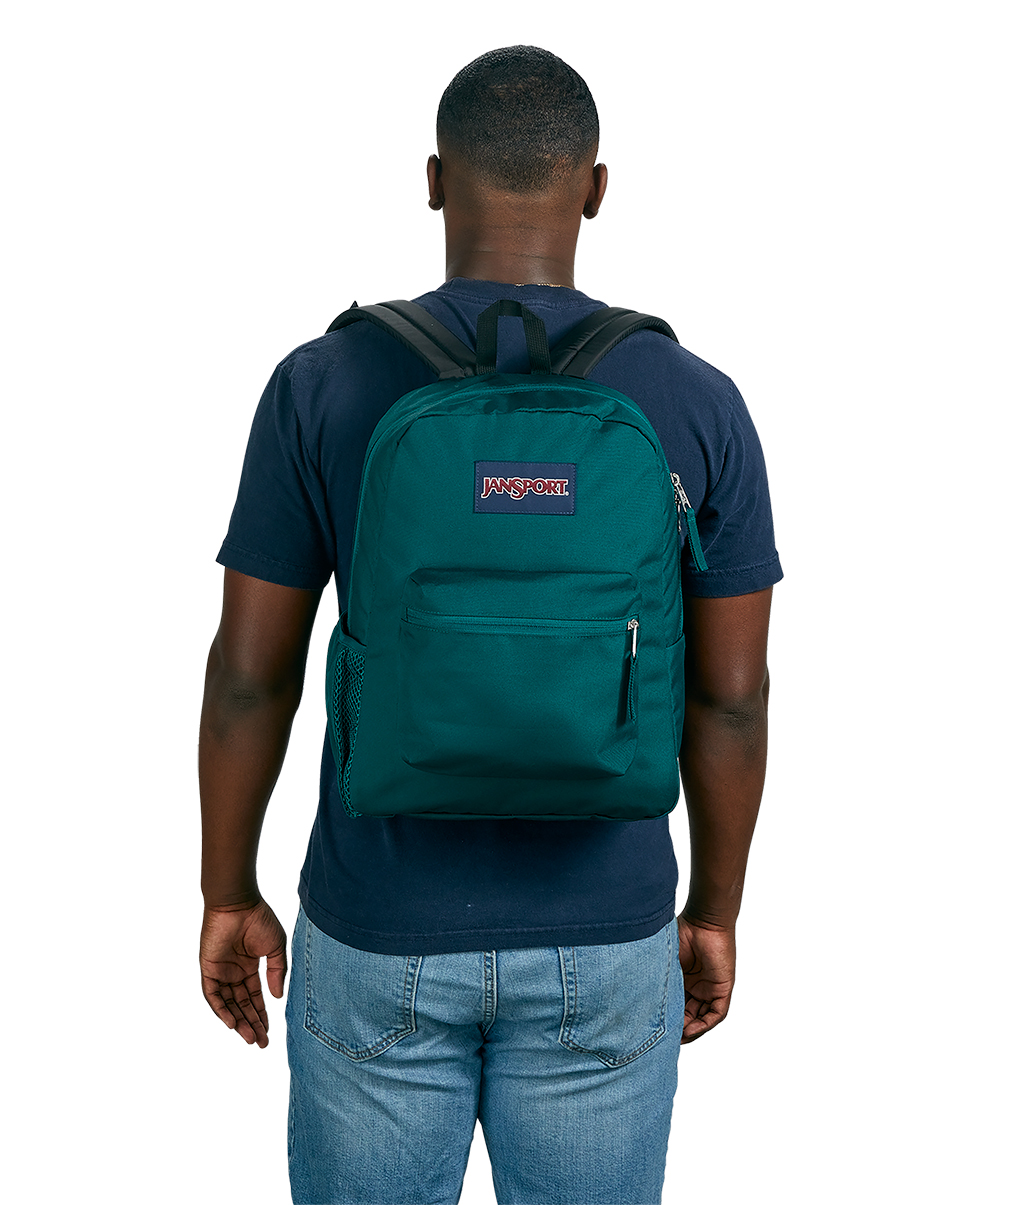 jansport_cross-town_08-13-2024__picture-1896